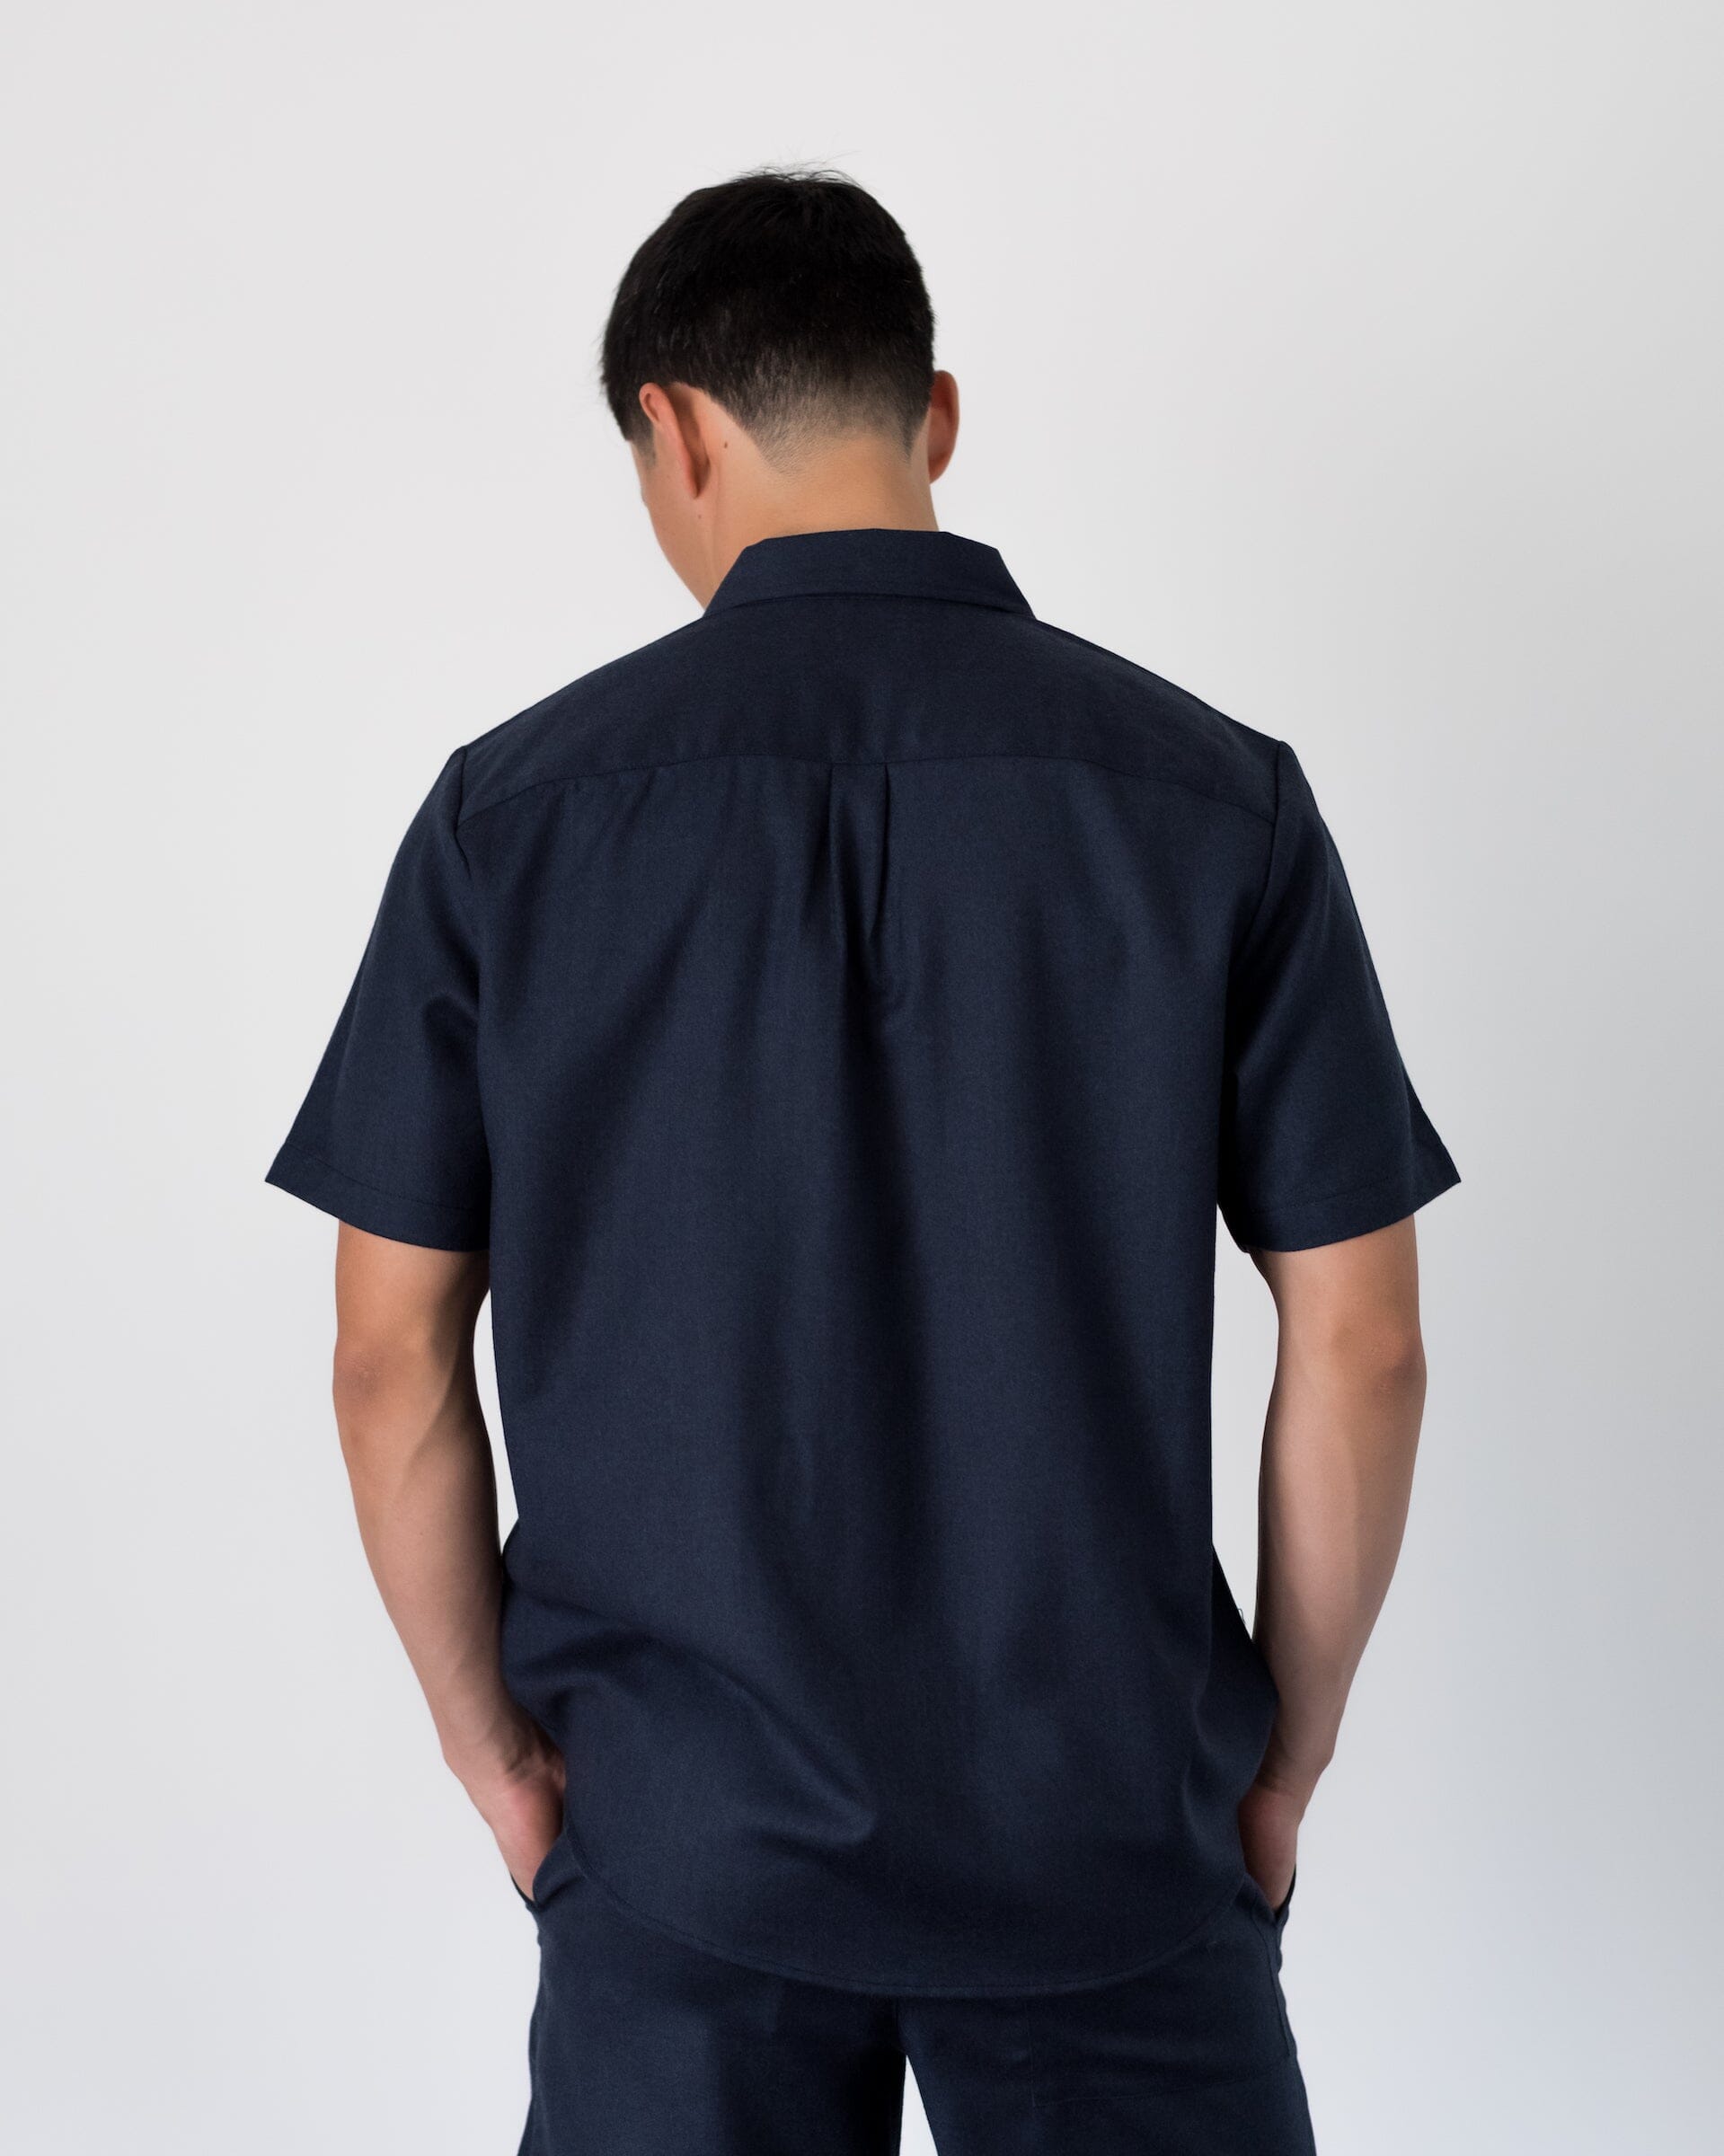 The Light Wool Short Sleeve Shirt in Heather Navy - Full Body 2 #color_heather navy